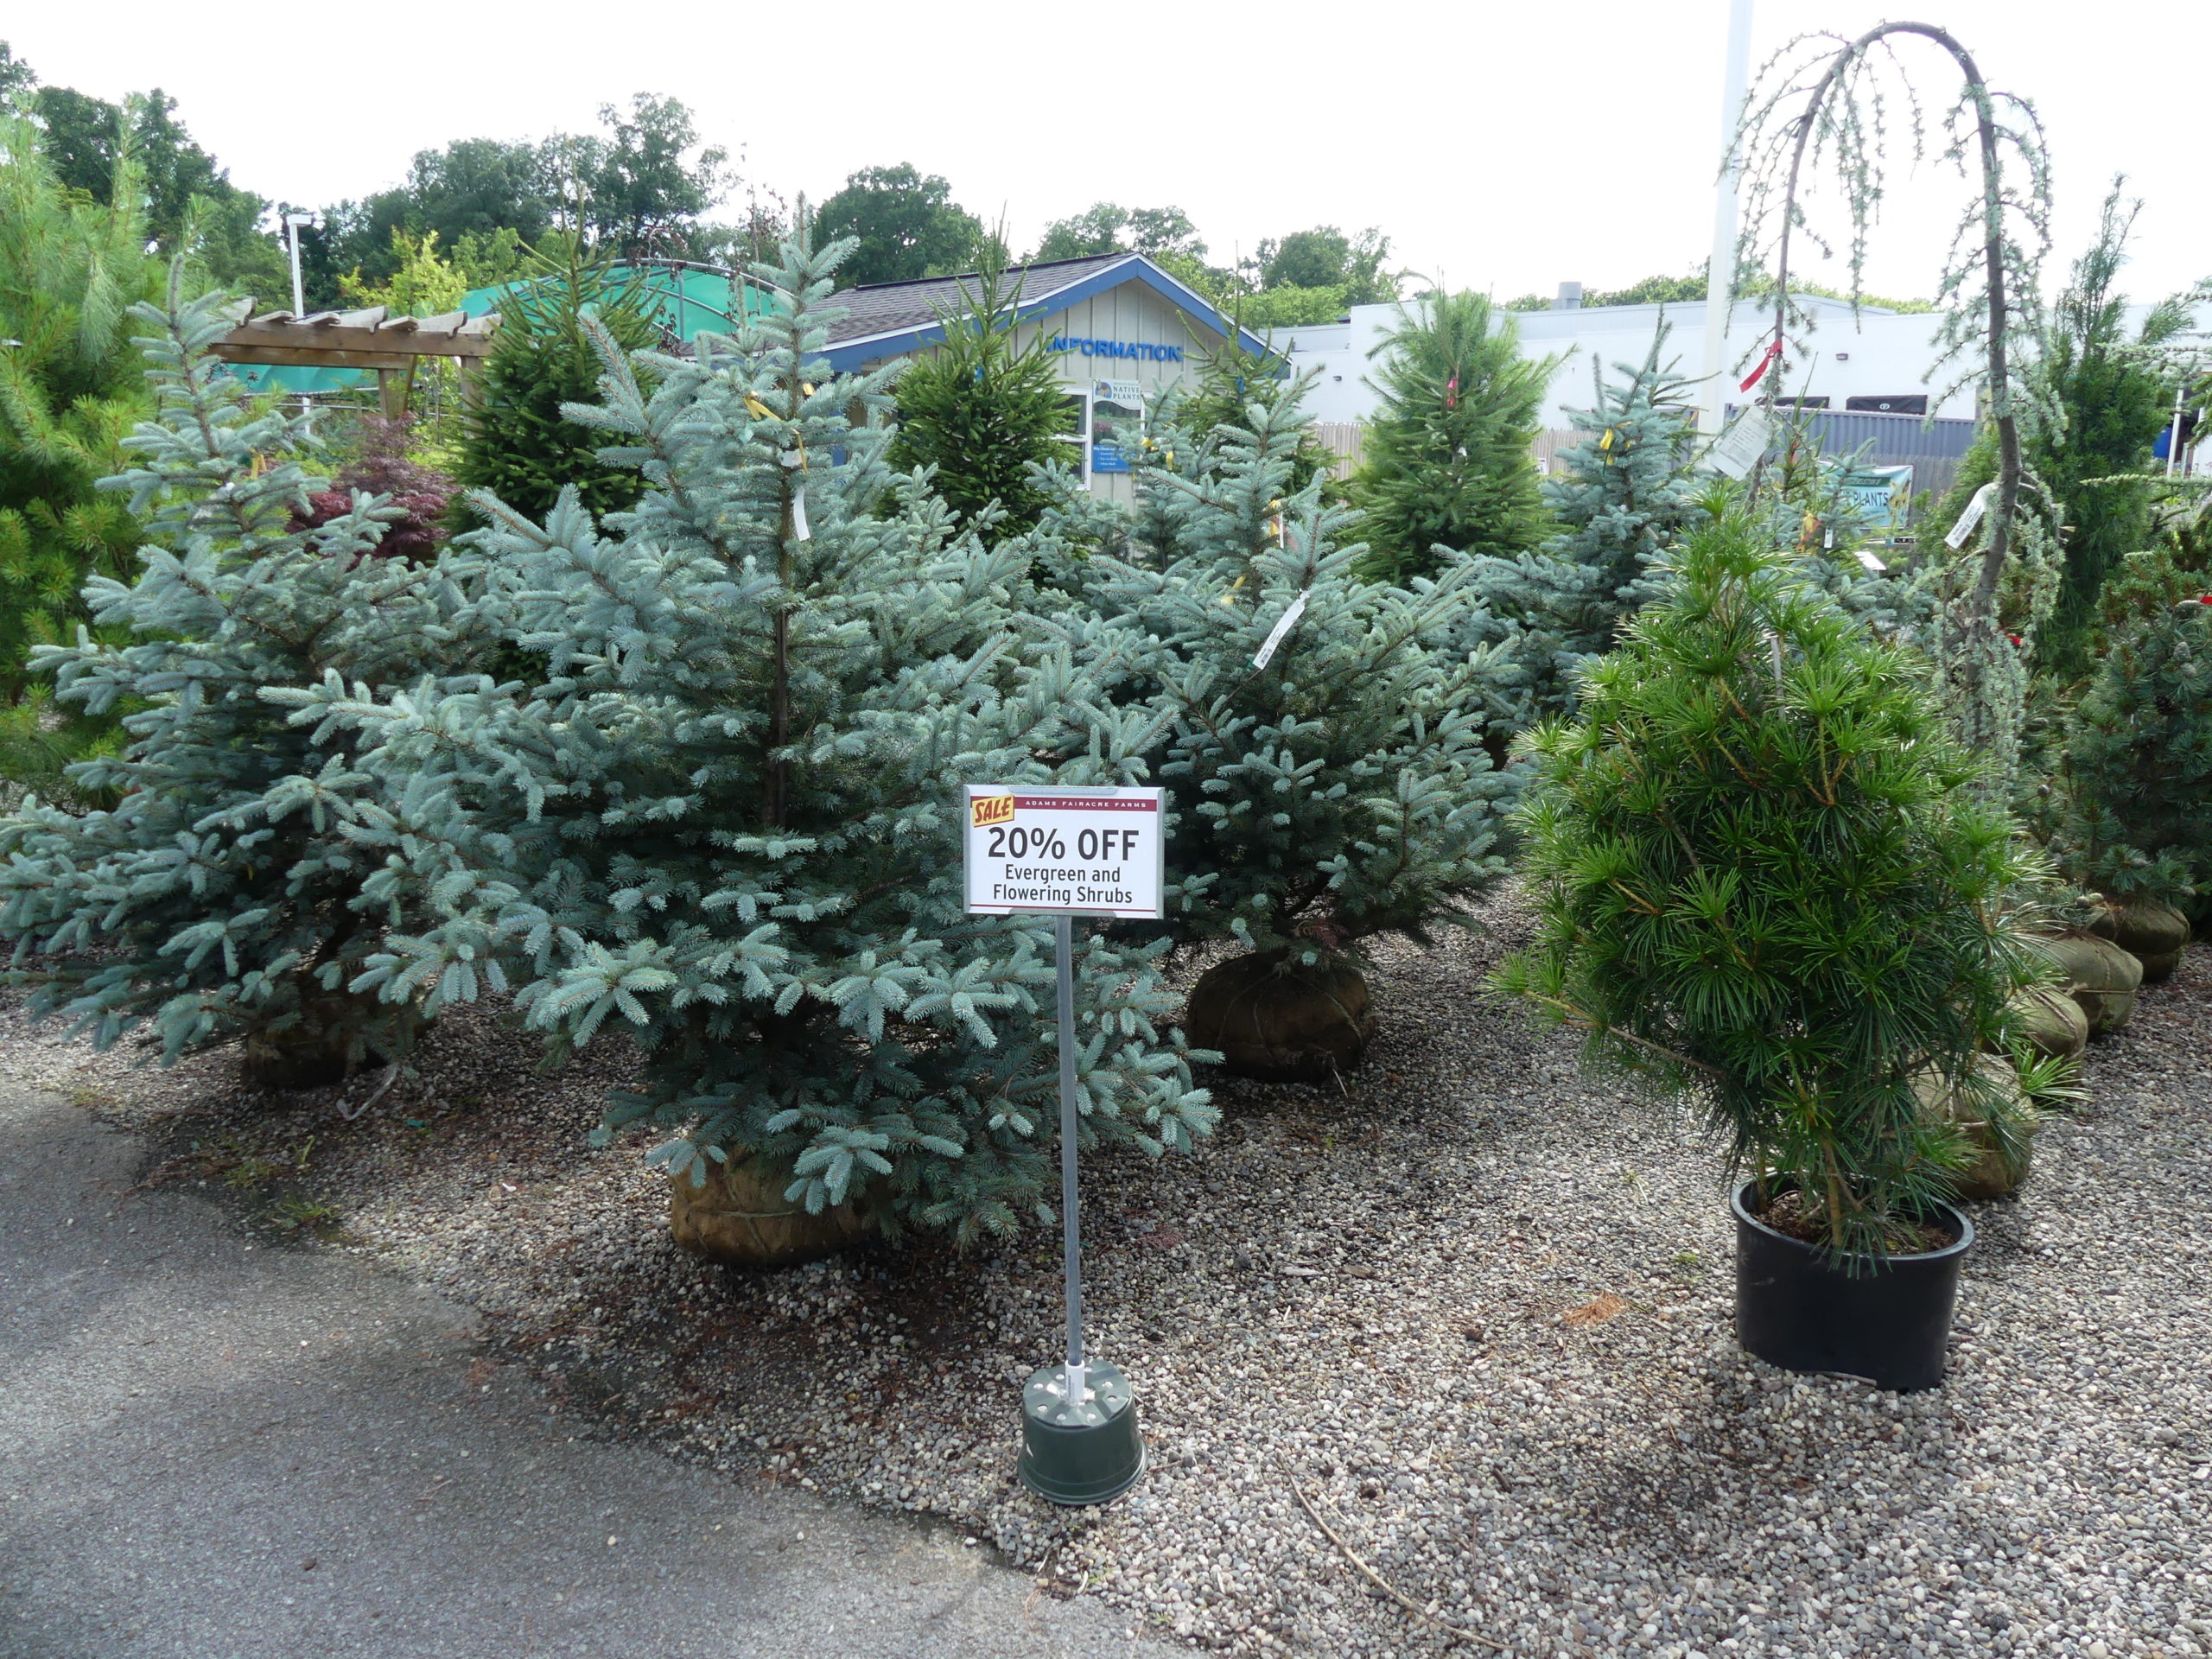 These balled and burlapped  (B&B) evergreens are also discounted but appear to be in great shape. These are small enough for you to plant with a little help. Plant these slightly high, fold back the burlap or cut it, and cut off the twine once planted.  No fertilizer till next year, but water regularly when there’s no rain for the first year. ANDREW MESSINGER